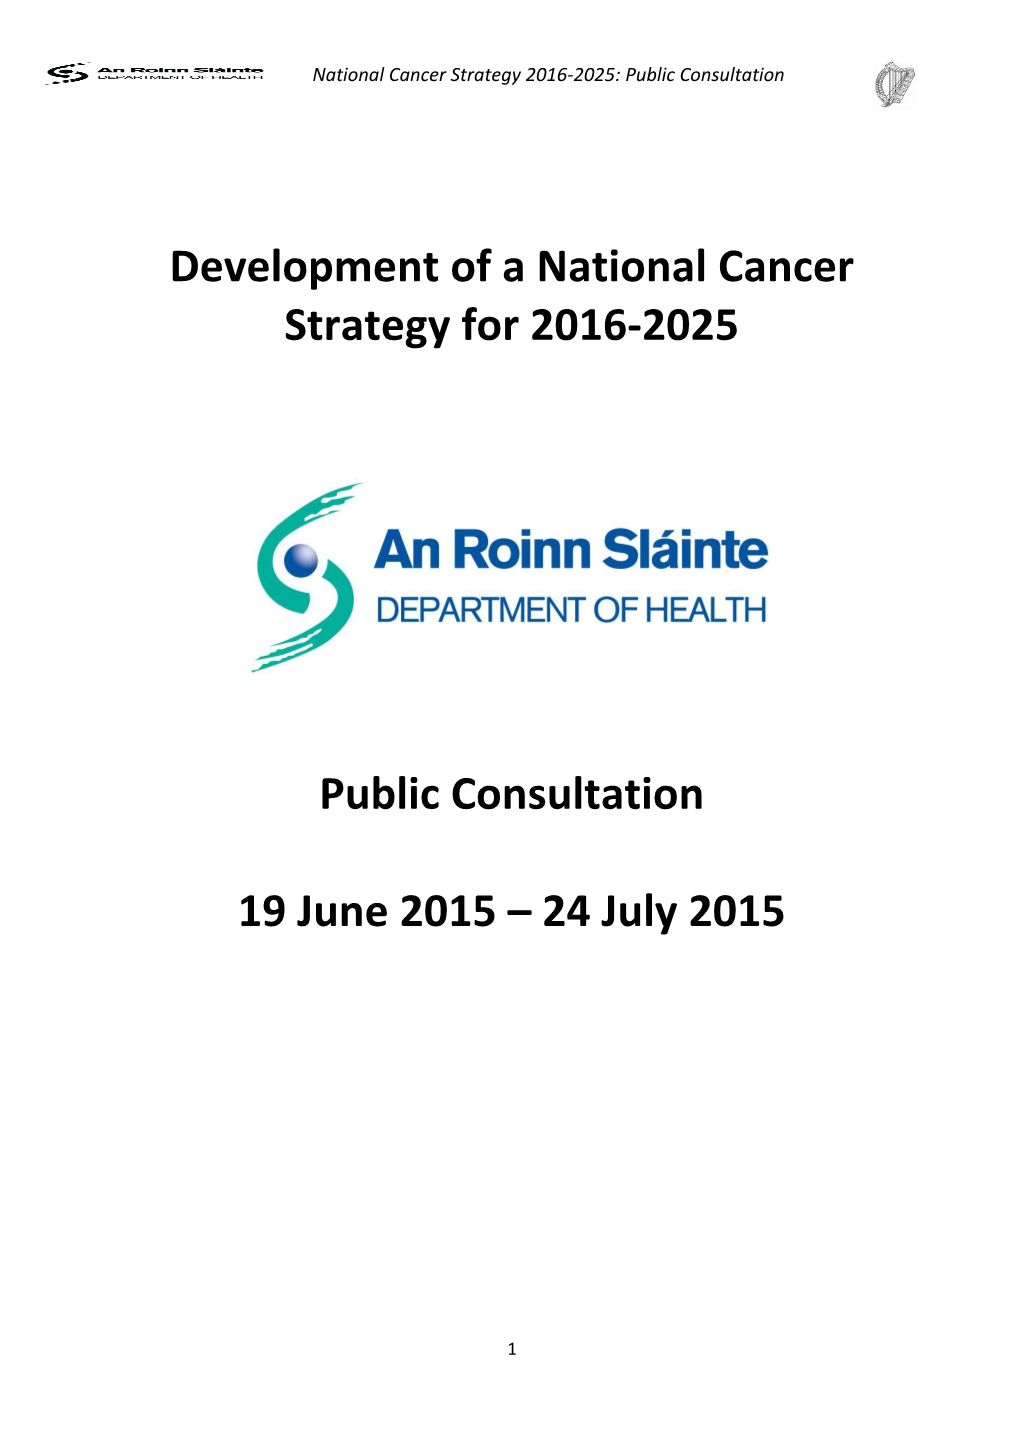 Development of a National Cancer Strategy for 2016-2025